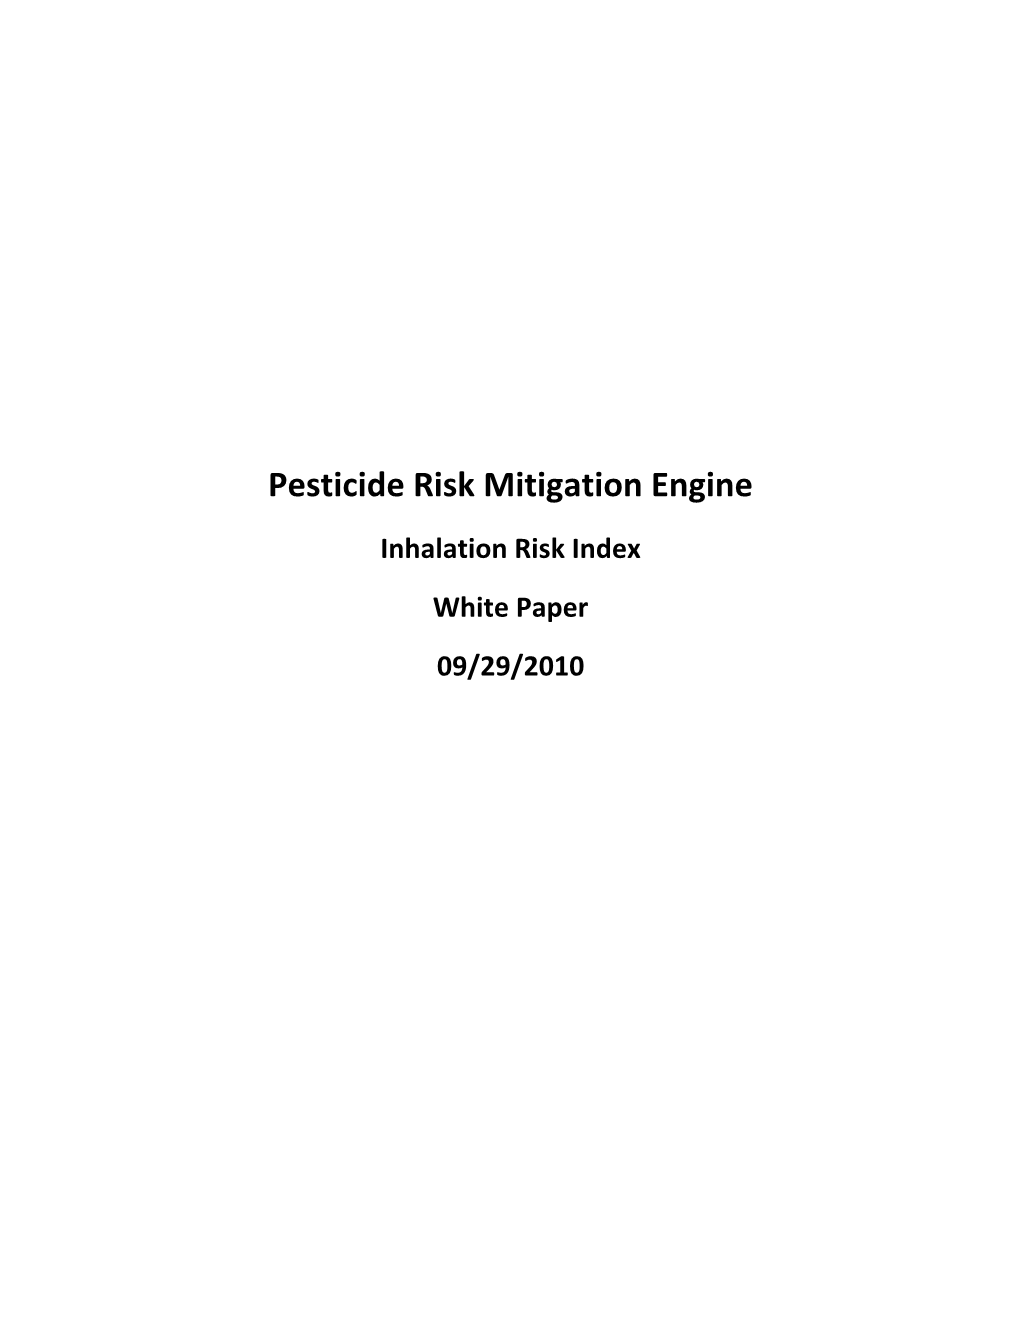 Inhalation Risk Index White Paper 09/29/2010 AUTHORS: Susan Kegley and Erin Conlisk, Pesticide Research Institute